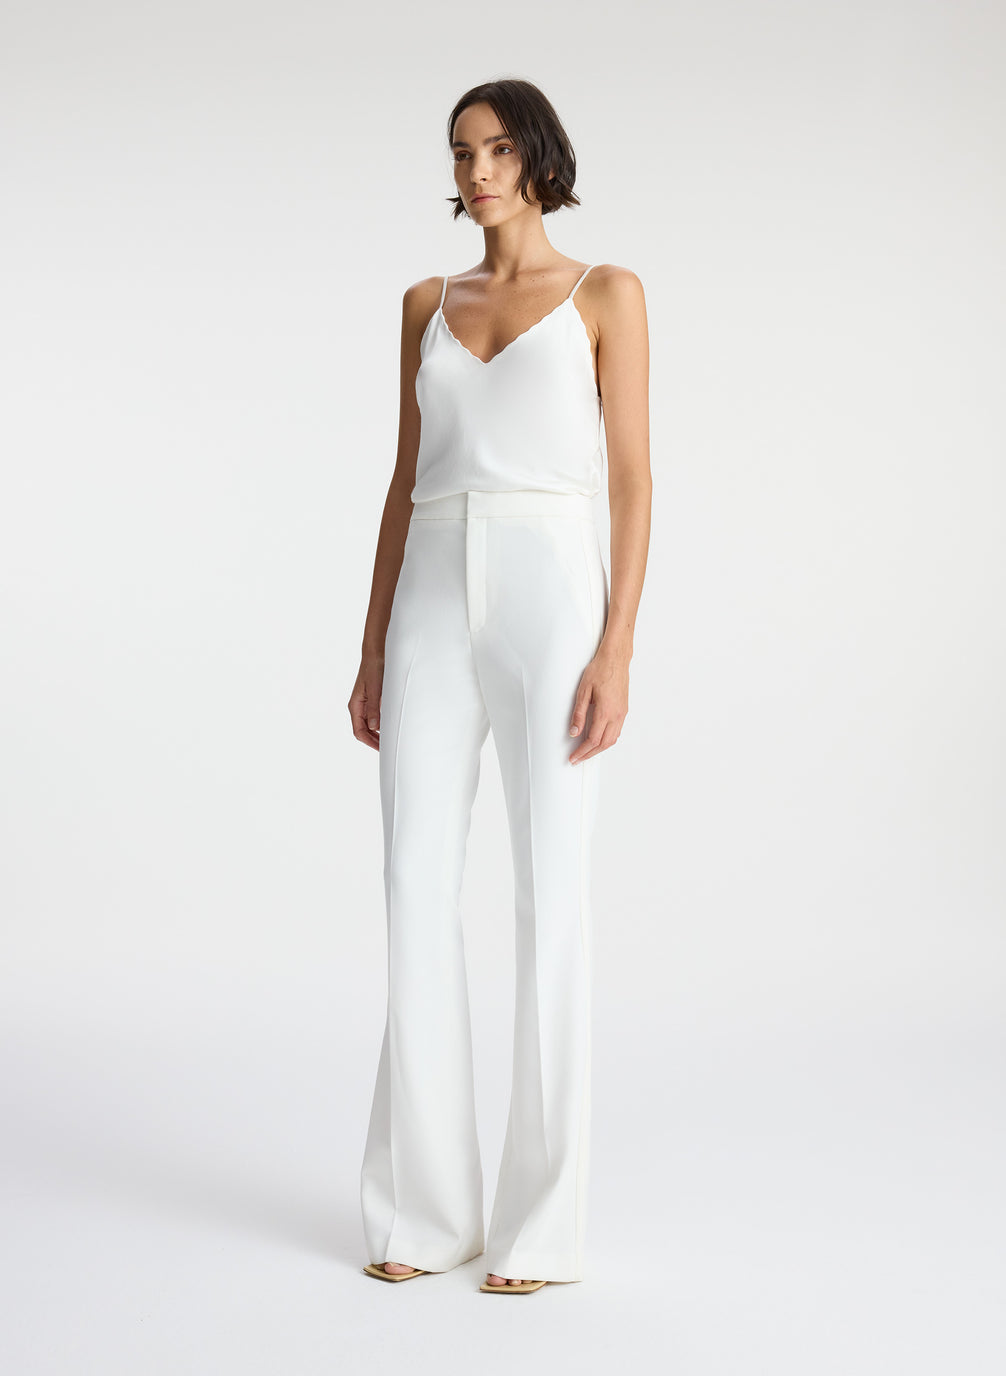 side view of woman wearing white satin camisole and white flared tuxedo pants